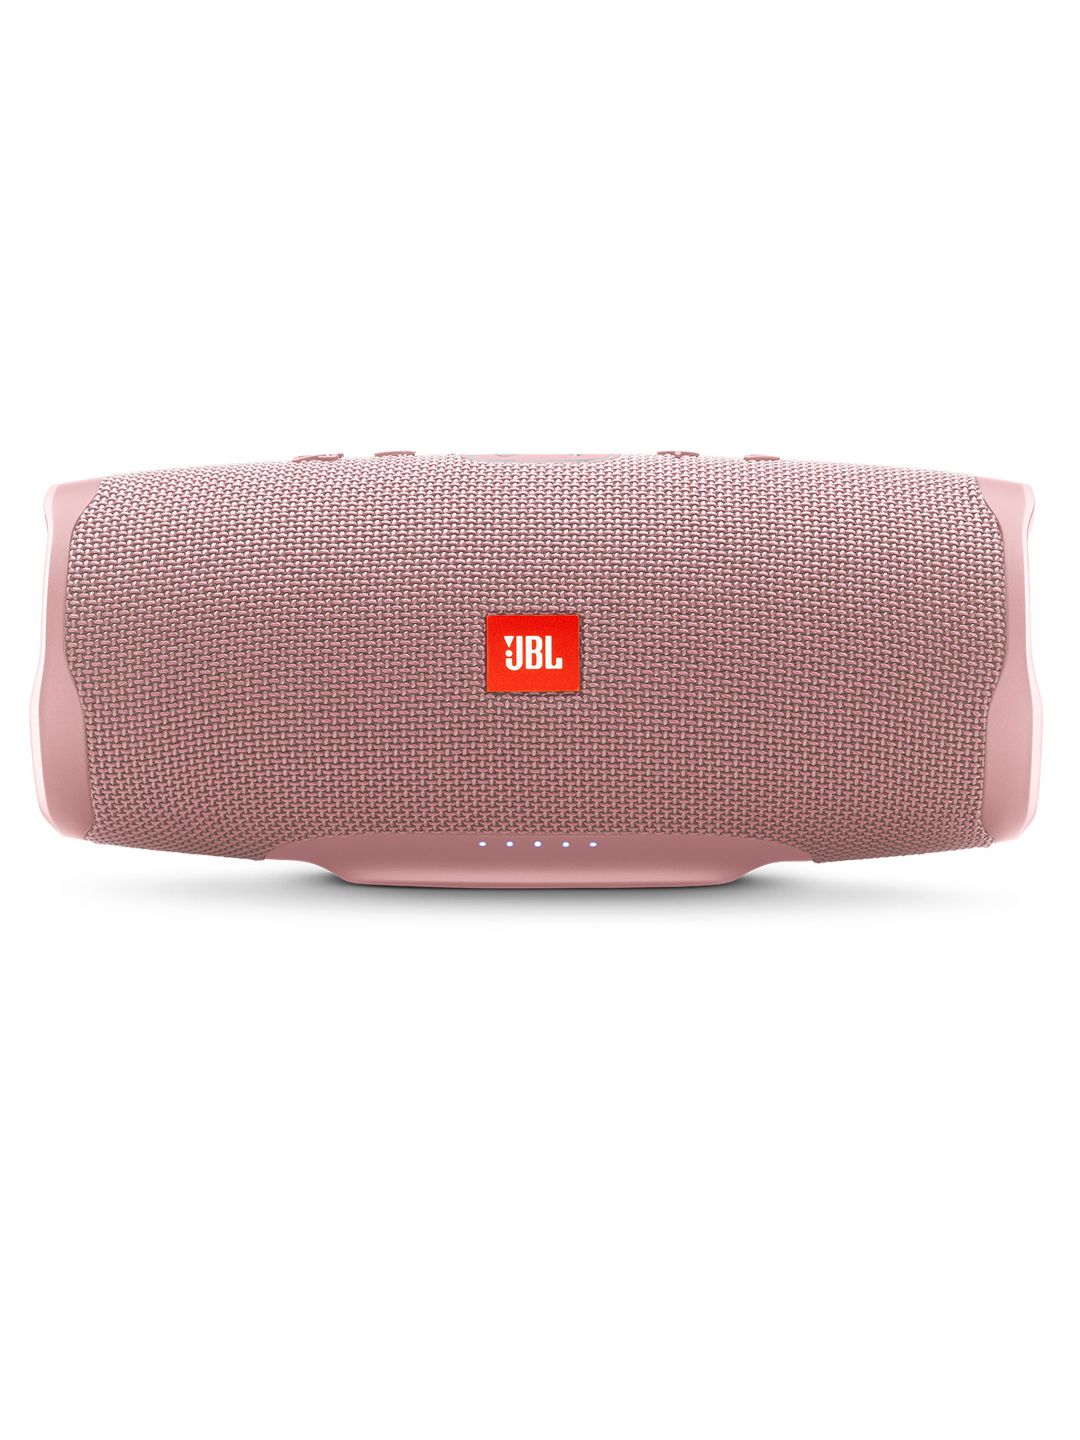 JBL Unisex Pink Charge 4 Powerful Portable Speaker with Built-in Powerbank Price in India